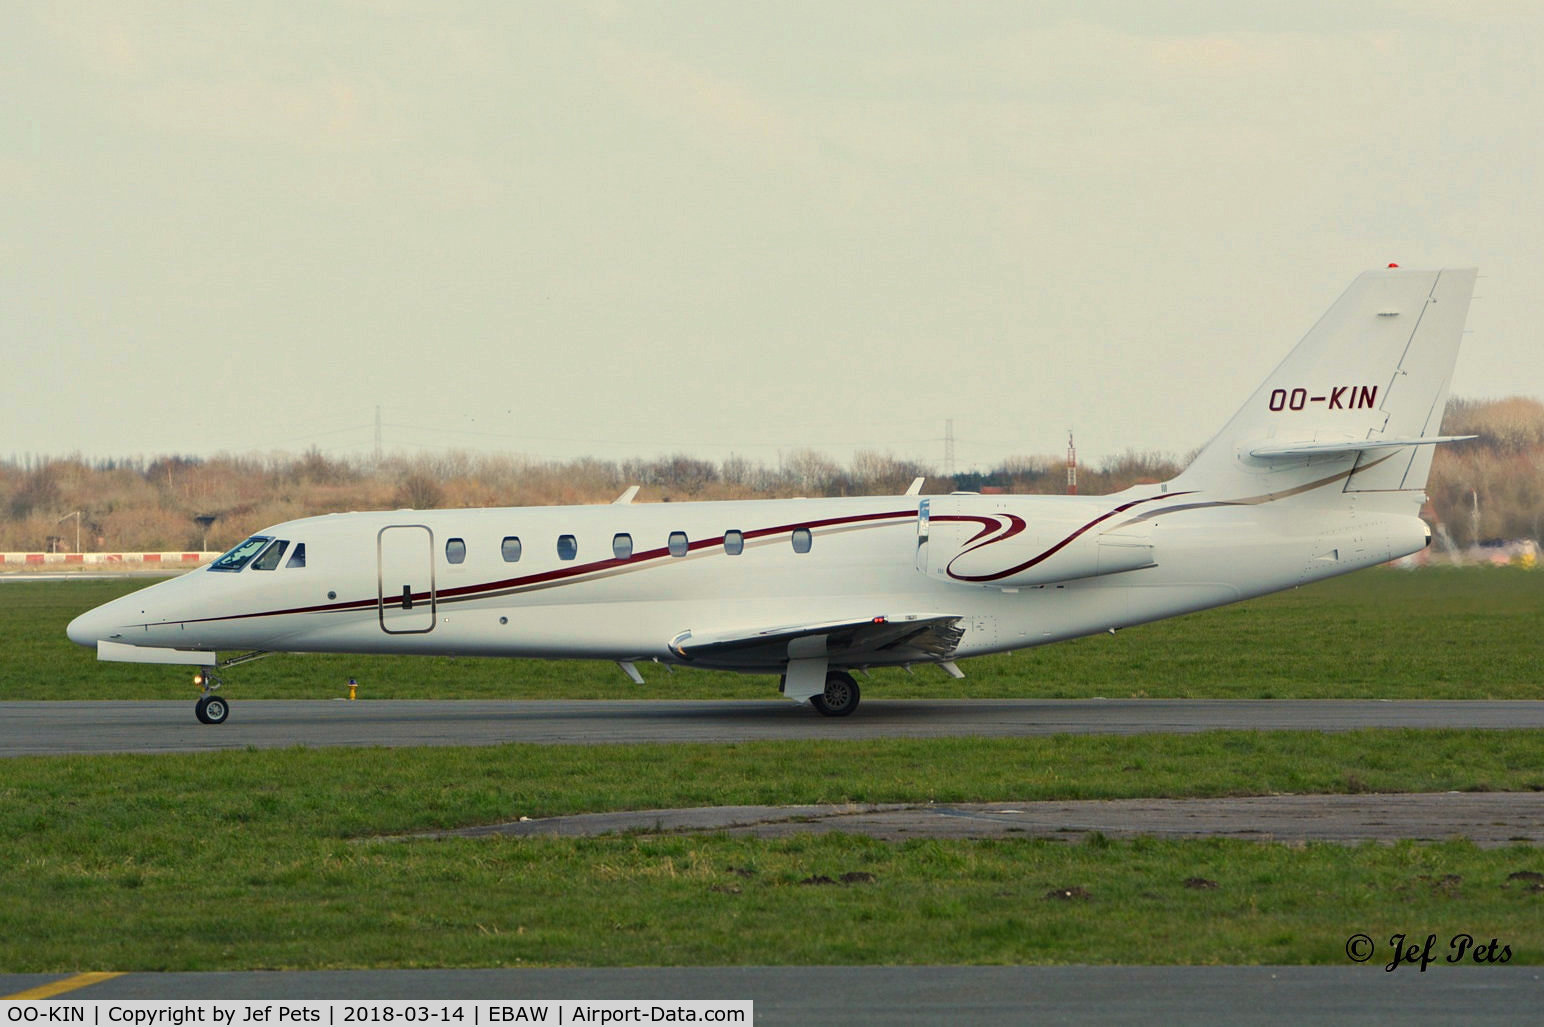 OO-KIN, 2007 Cessna 680 Citation Sovereign C/N 680-0179, Taxiing at Antwerp Airport.